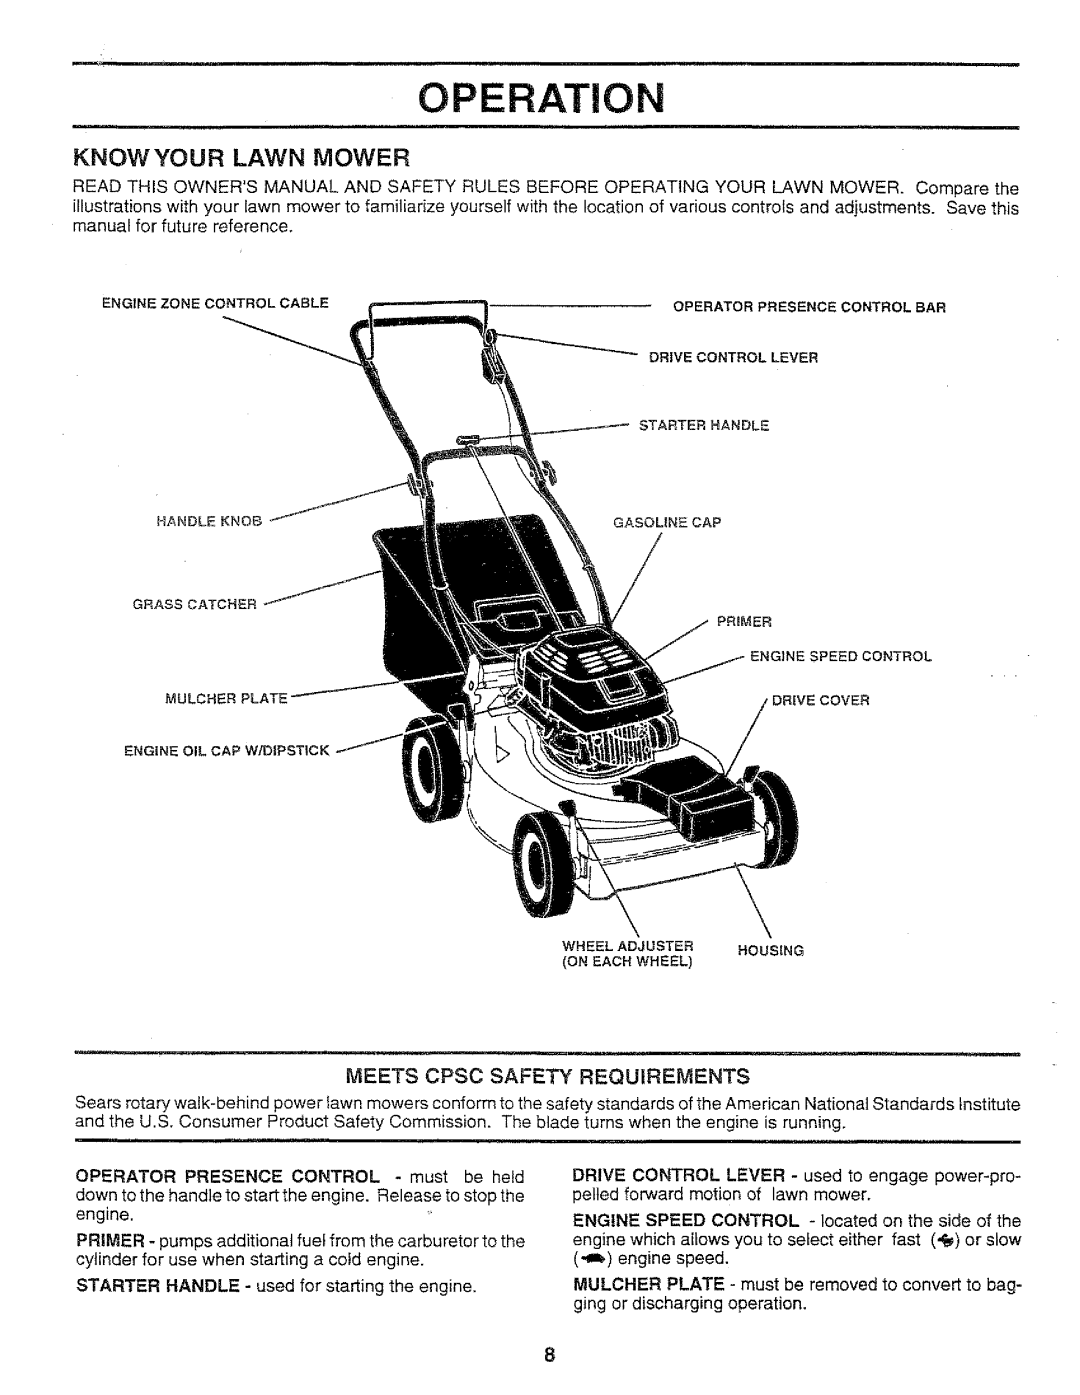 Sears 917.37283 manual Operation, Knowyour Lawn Mower 